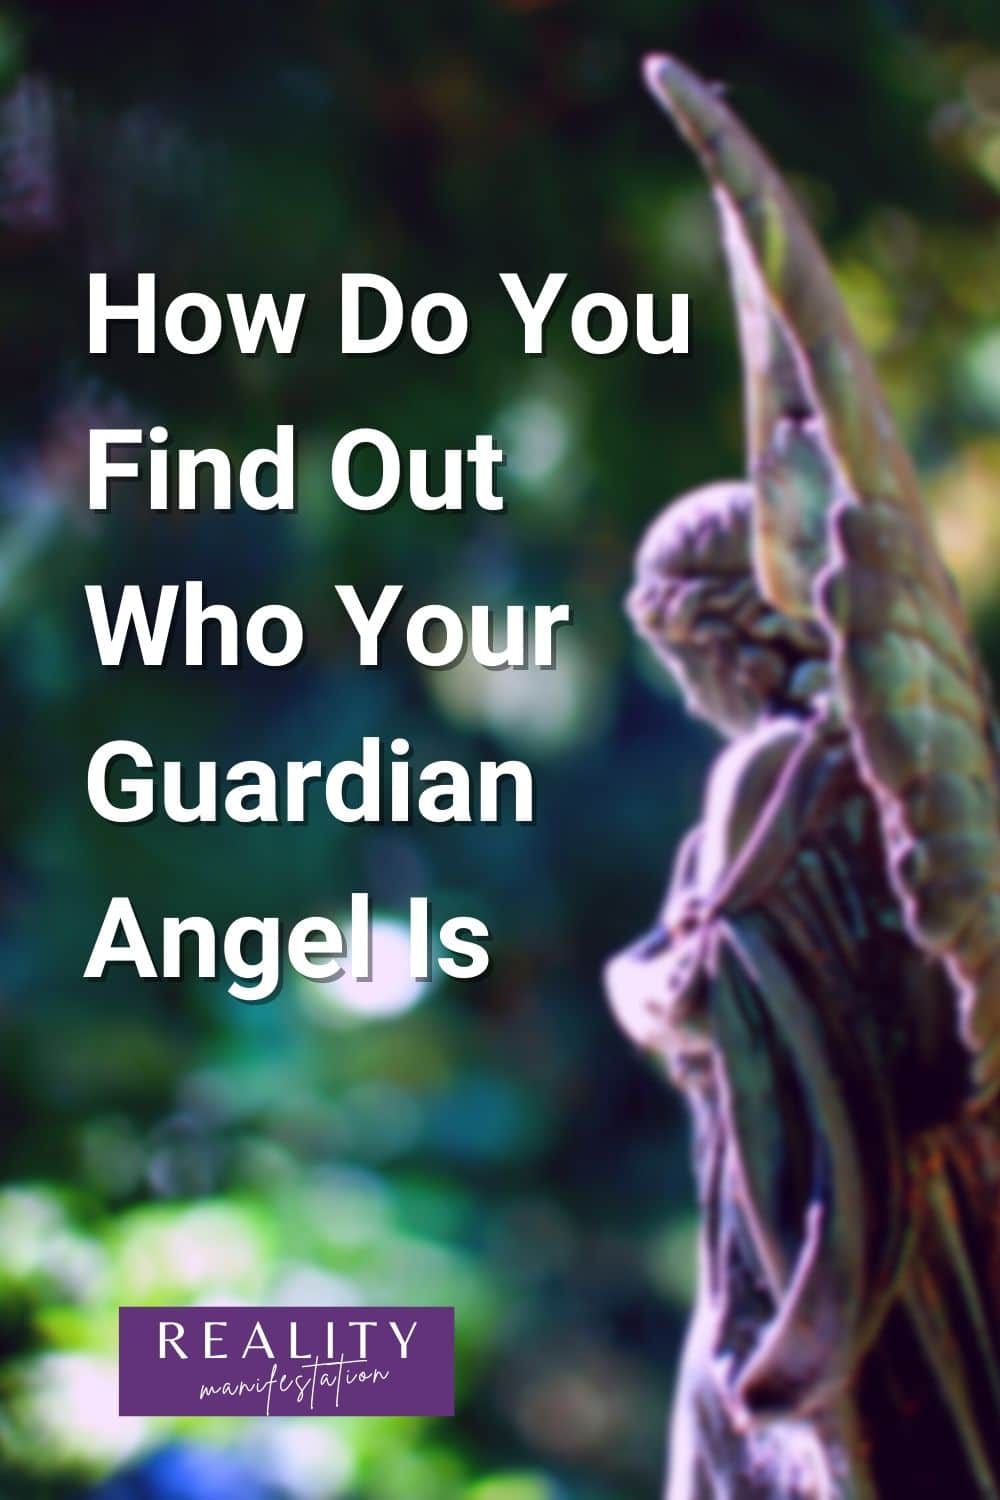 Statue of a angel with text saying How Do You Find Out Who Your Guardian Angel Is